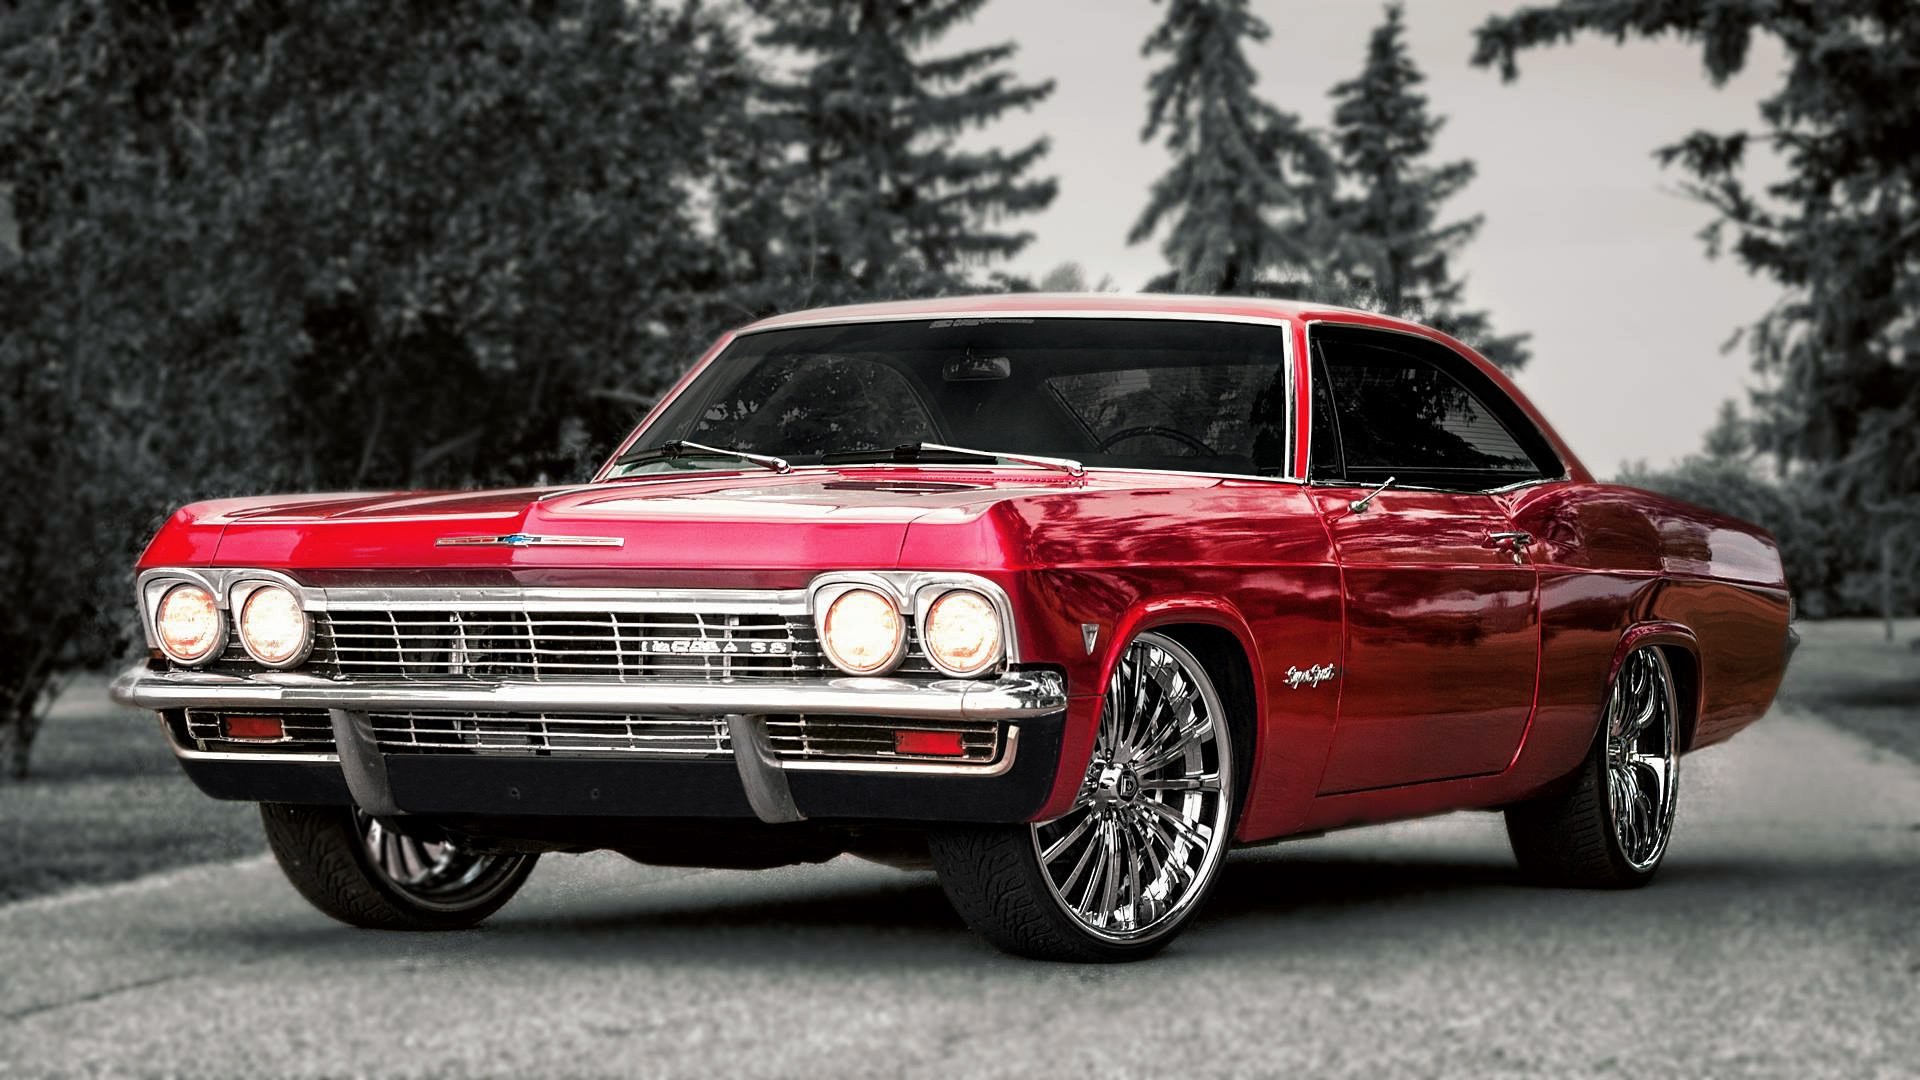 1920x1080 The classical model of Chevrolet Impala SS